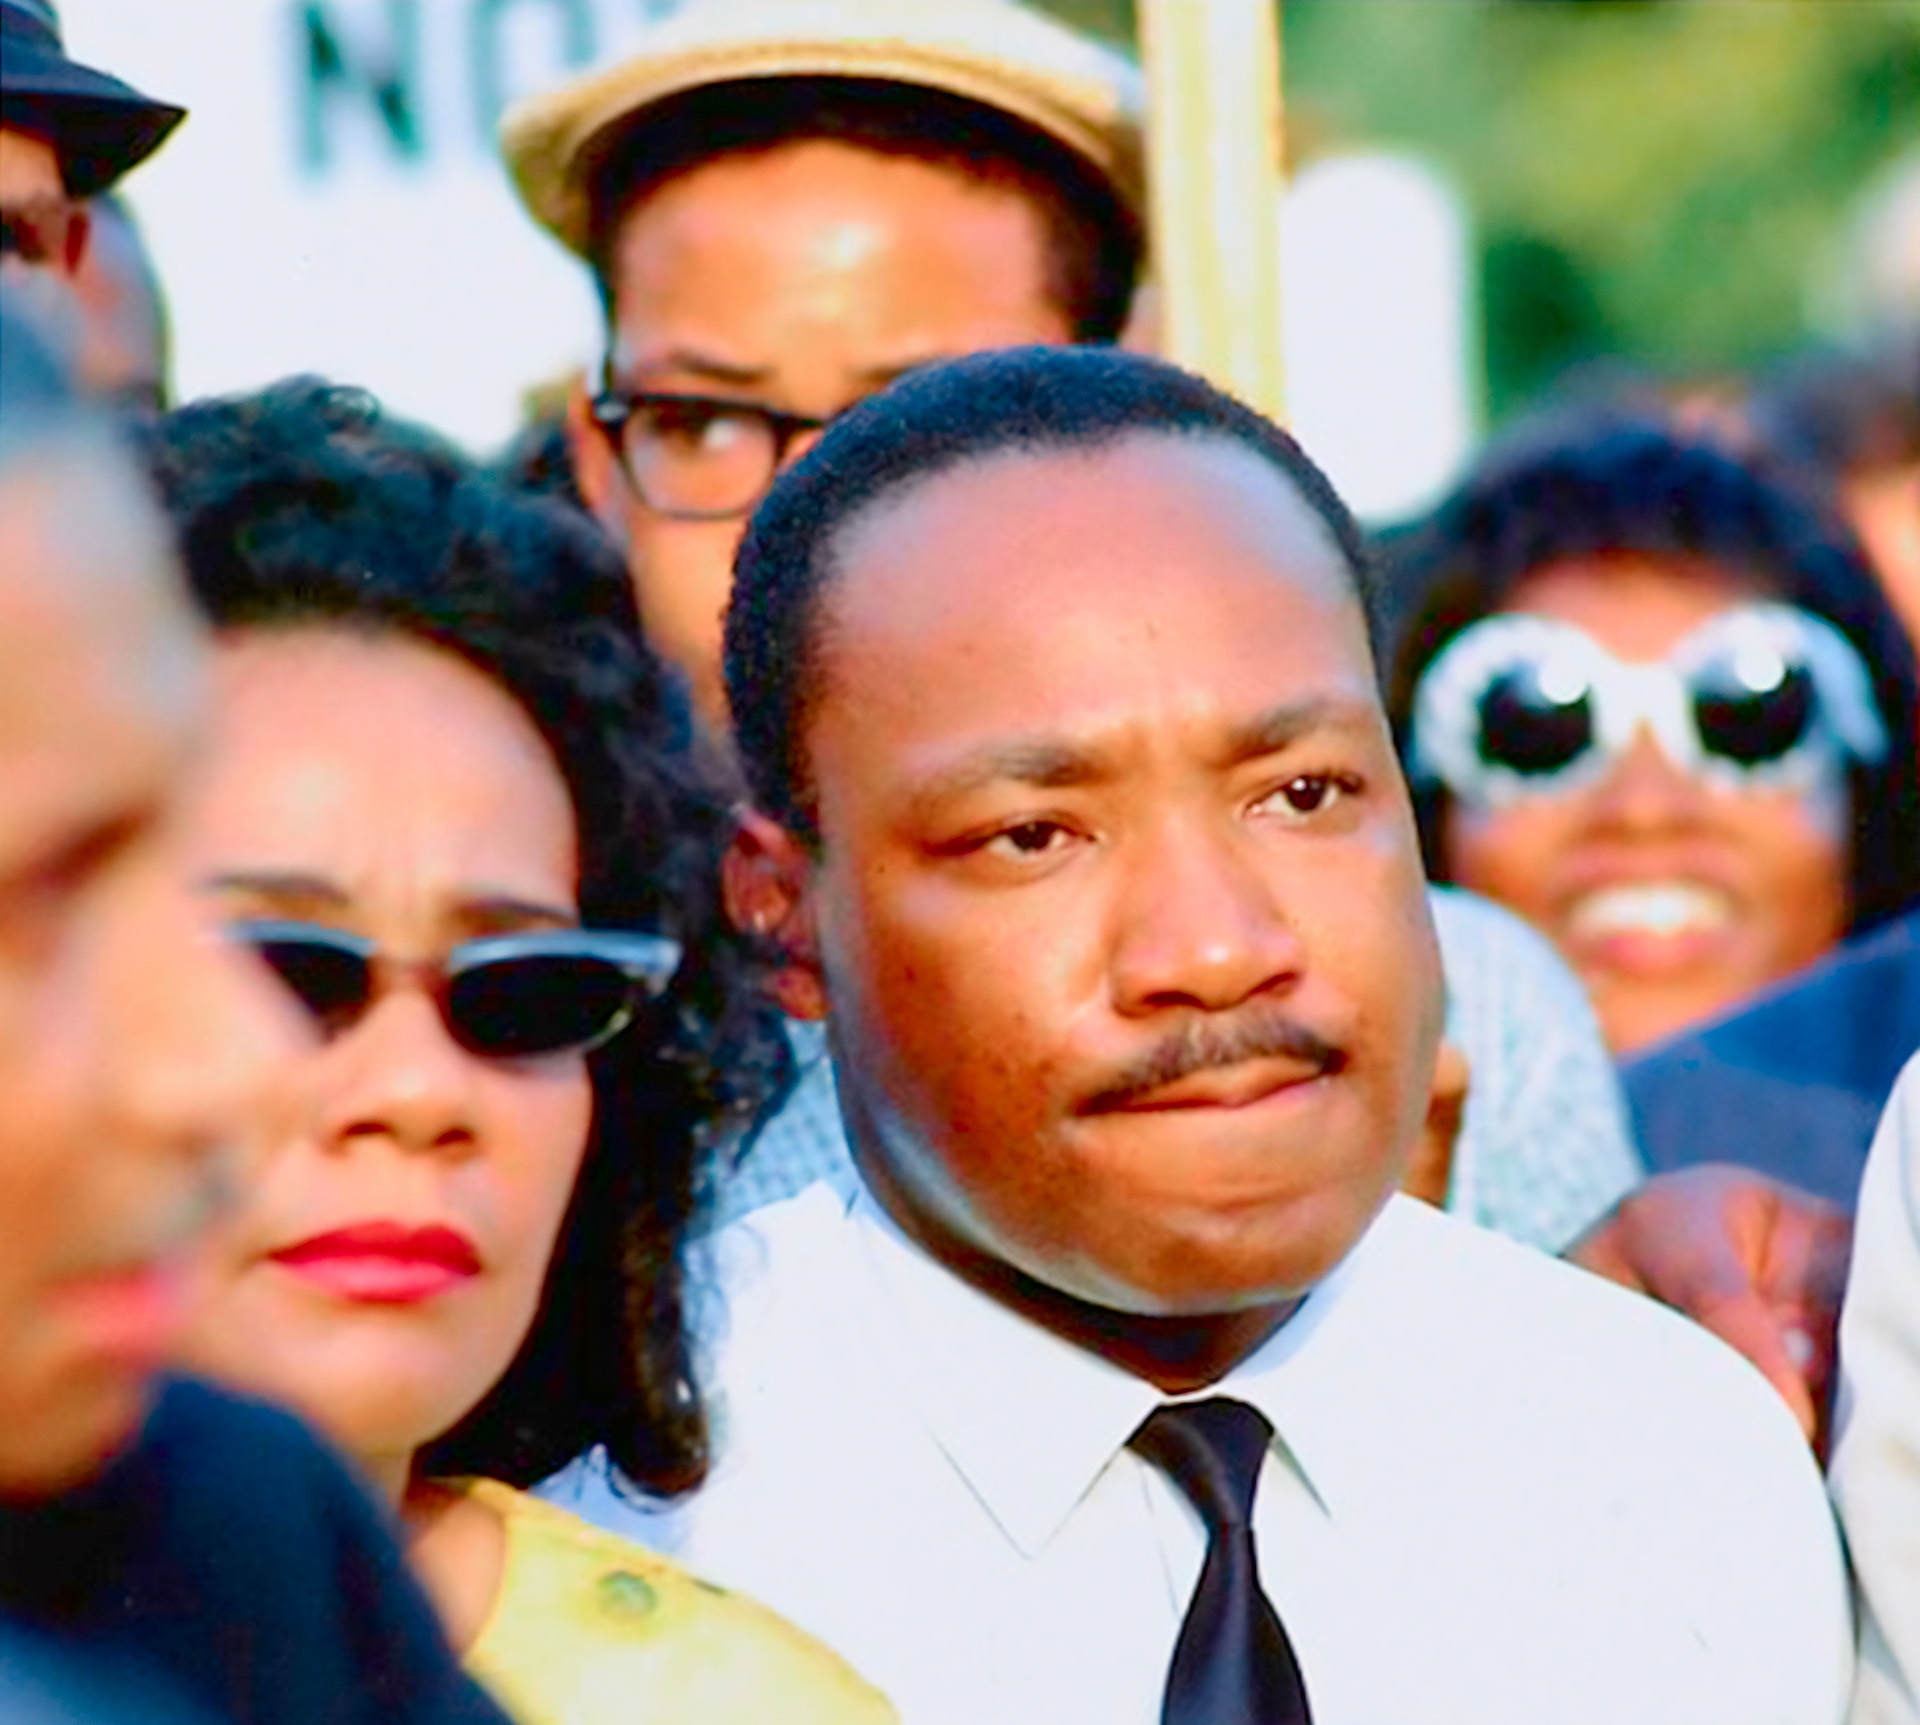 Dr. Martin Luther King, Jr. and Coretta Scott King at the "Freedom Sunday" rally held on June 10, 1966. Dr. King addressed 30,000 people at Soldier Field in Chicago, Illinois.